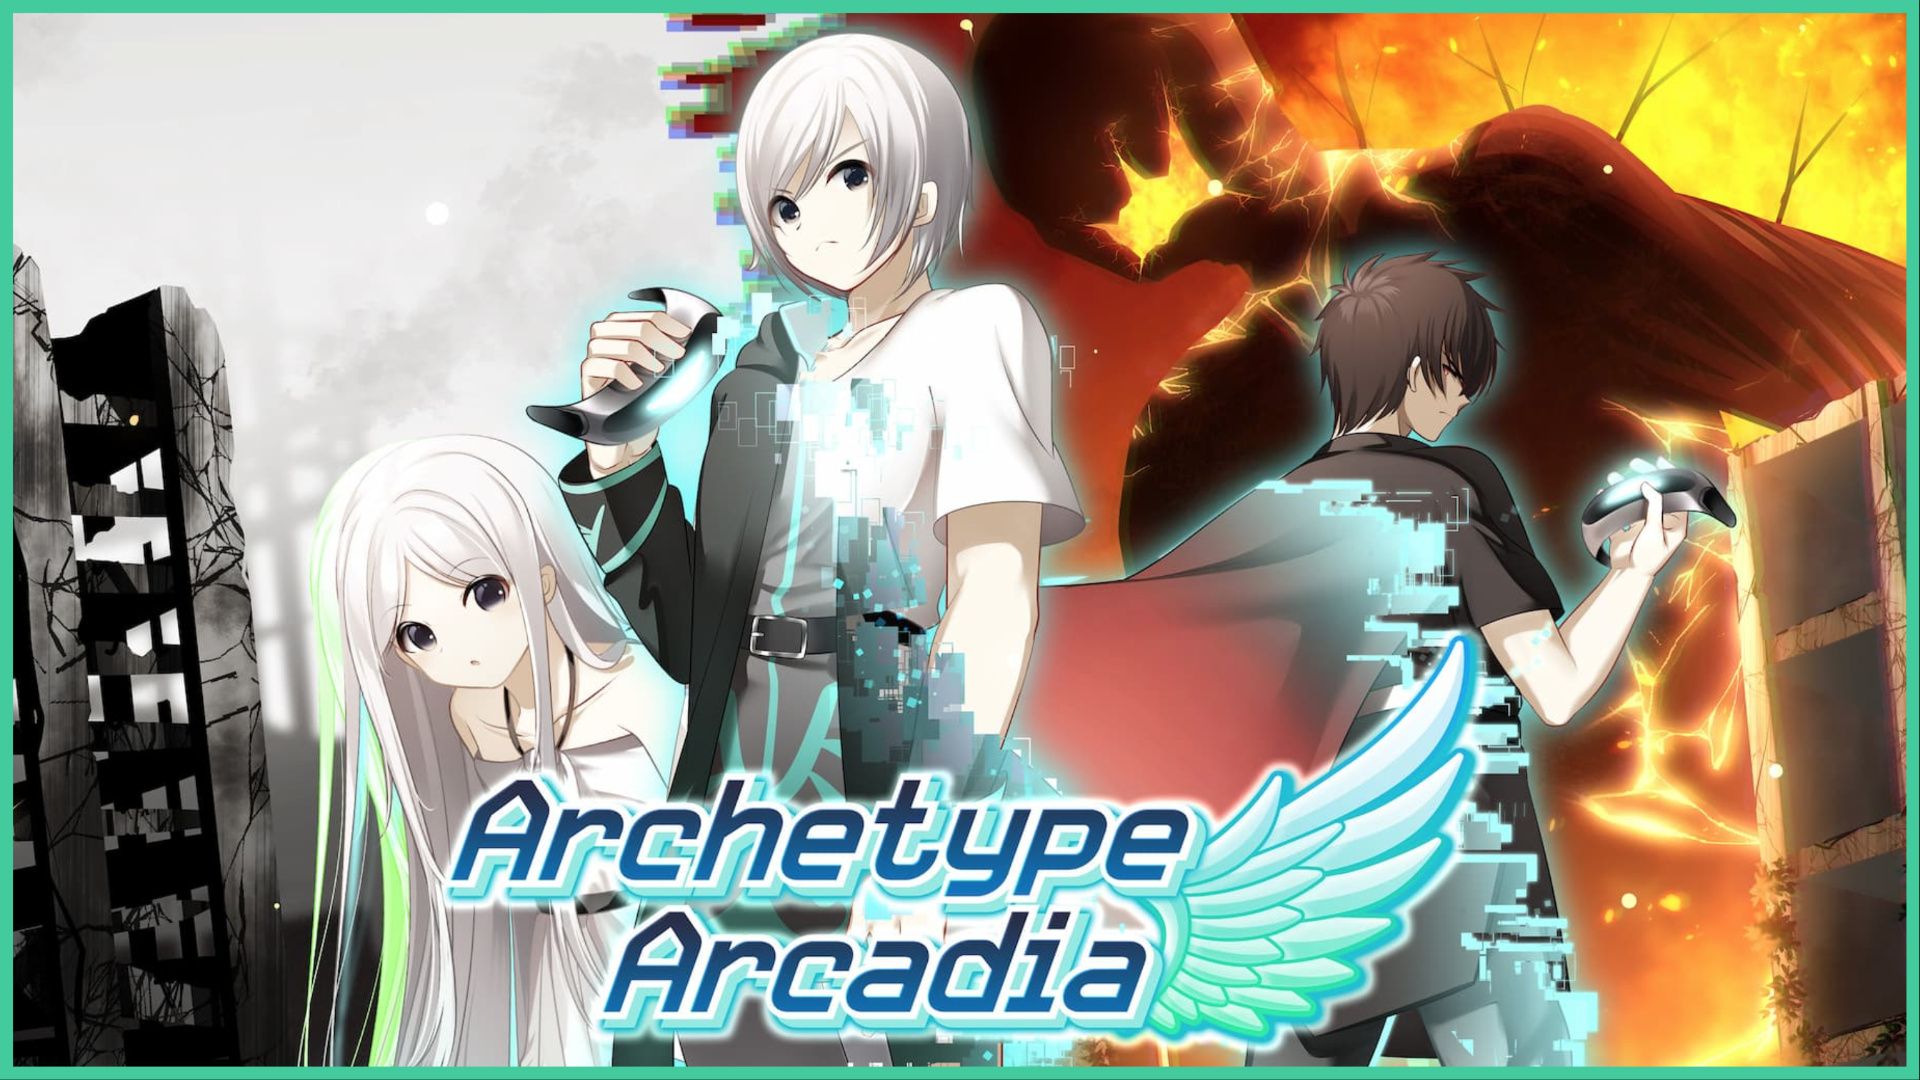 feature image for our archetype arcadia review, it's the official promo image for the game with kristin, rust, and another character standing together. to the left of the image is a broken building and to the right is a background of a tall monster towering above a derelict building that is surrounded by flames